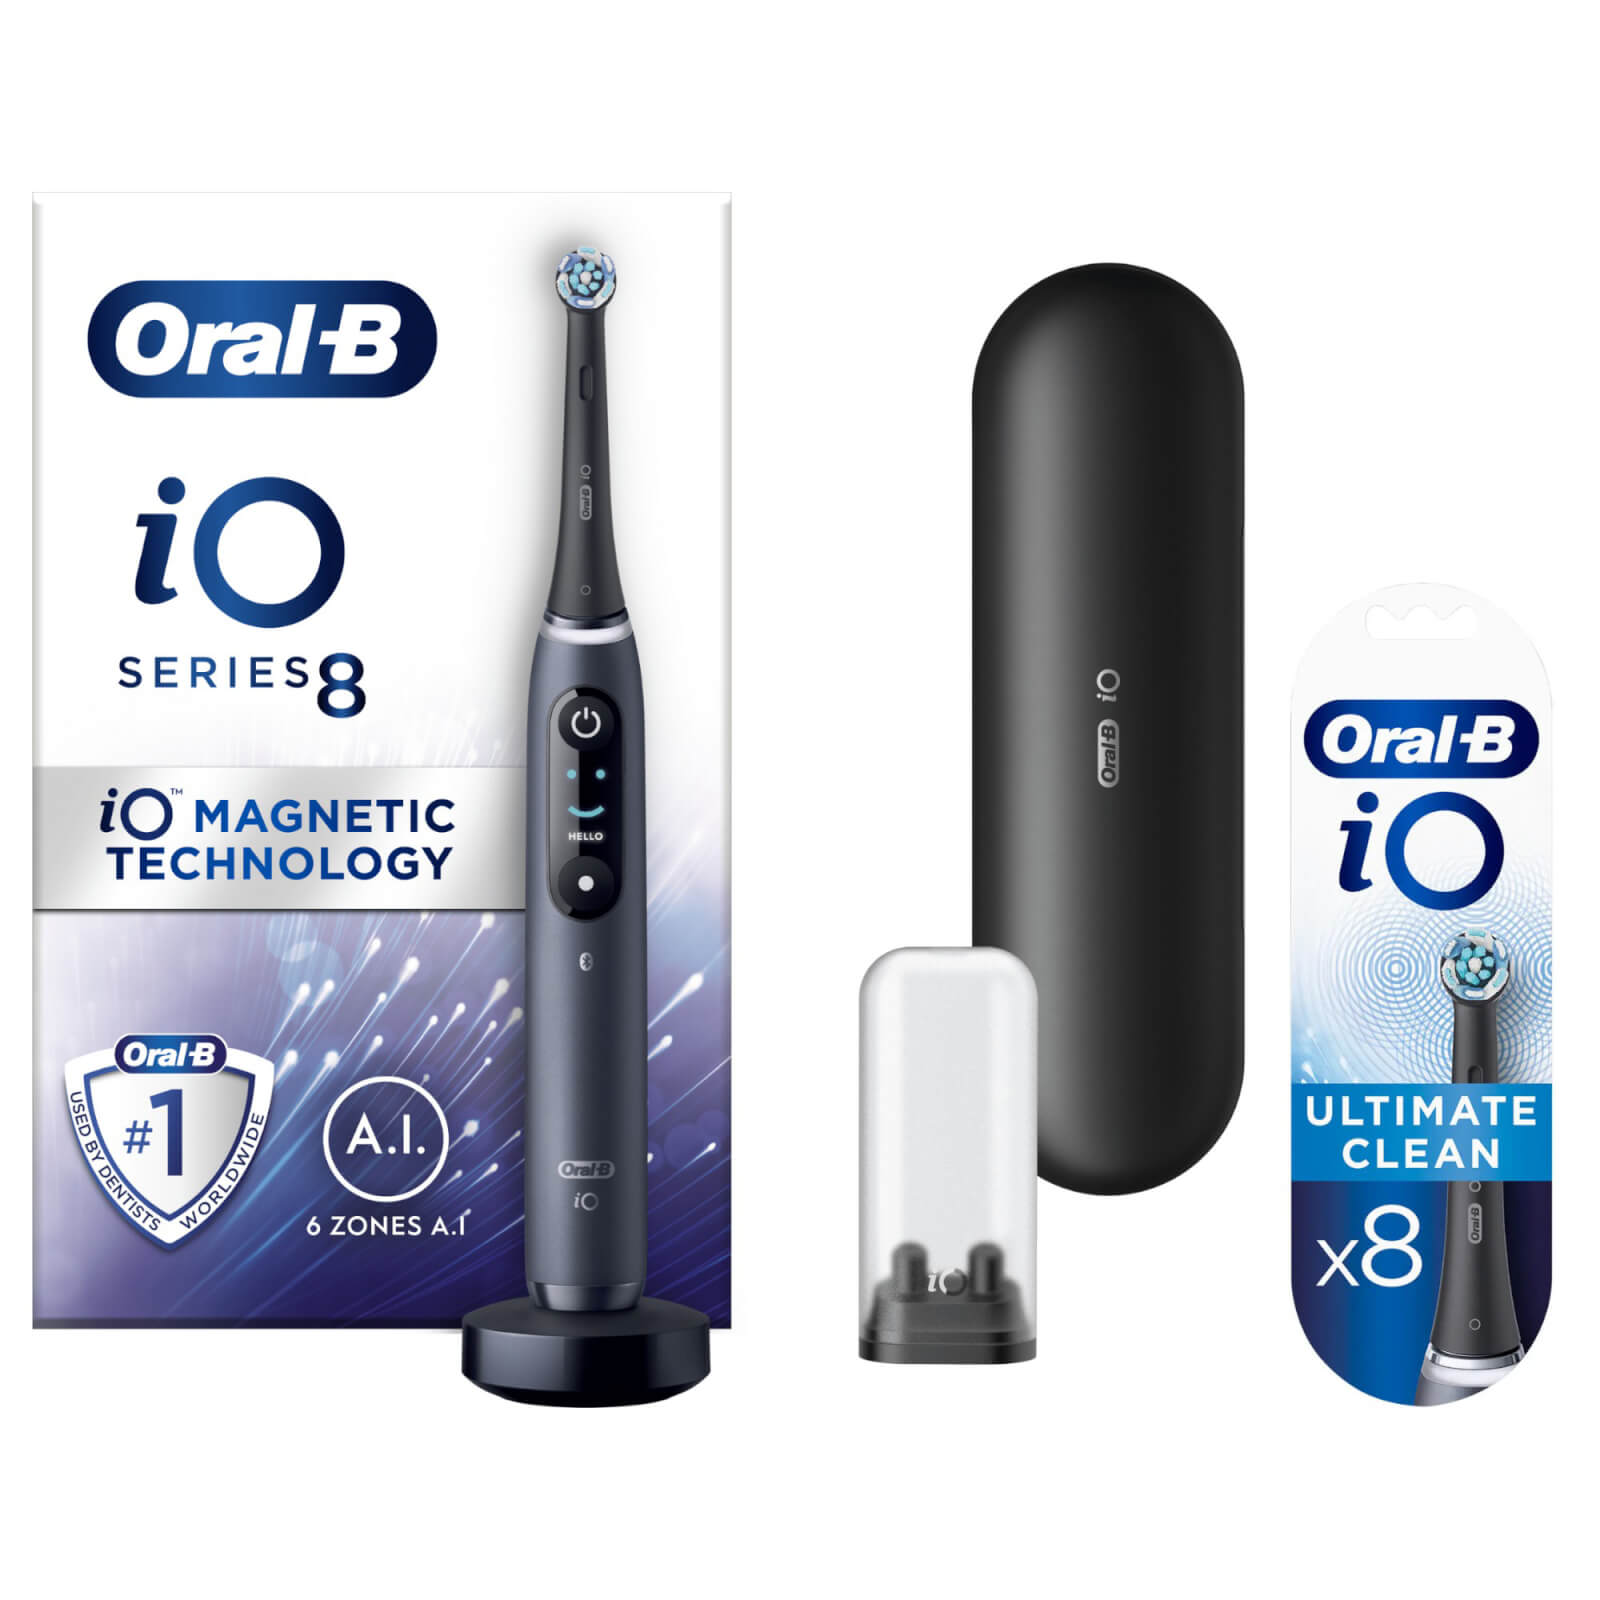 Oral B iO8 Black Electric Toothbrush with Travel Case - Toothbrush + 8 Refills